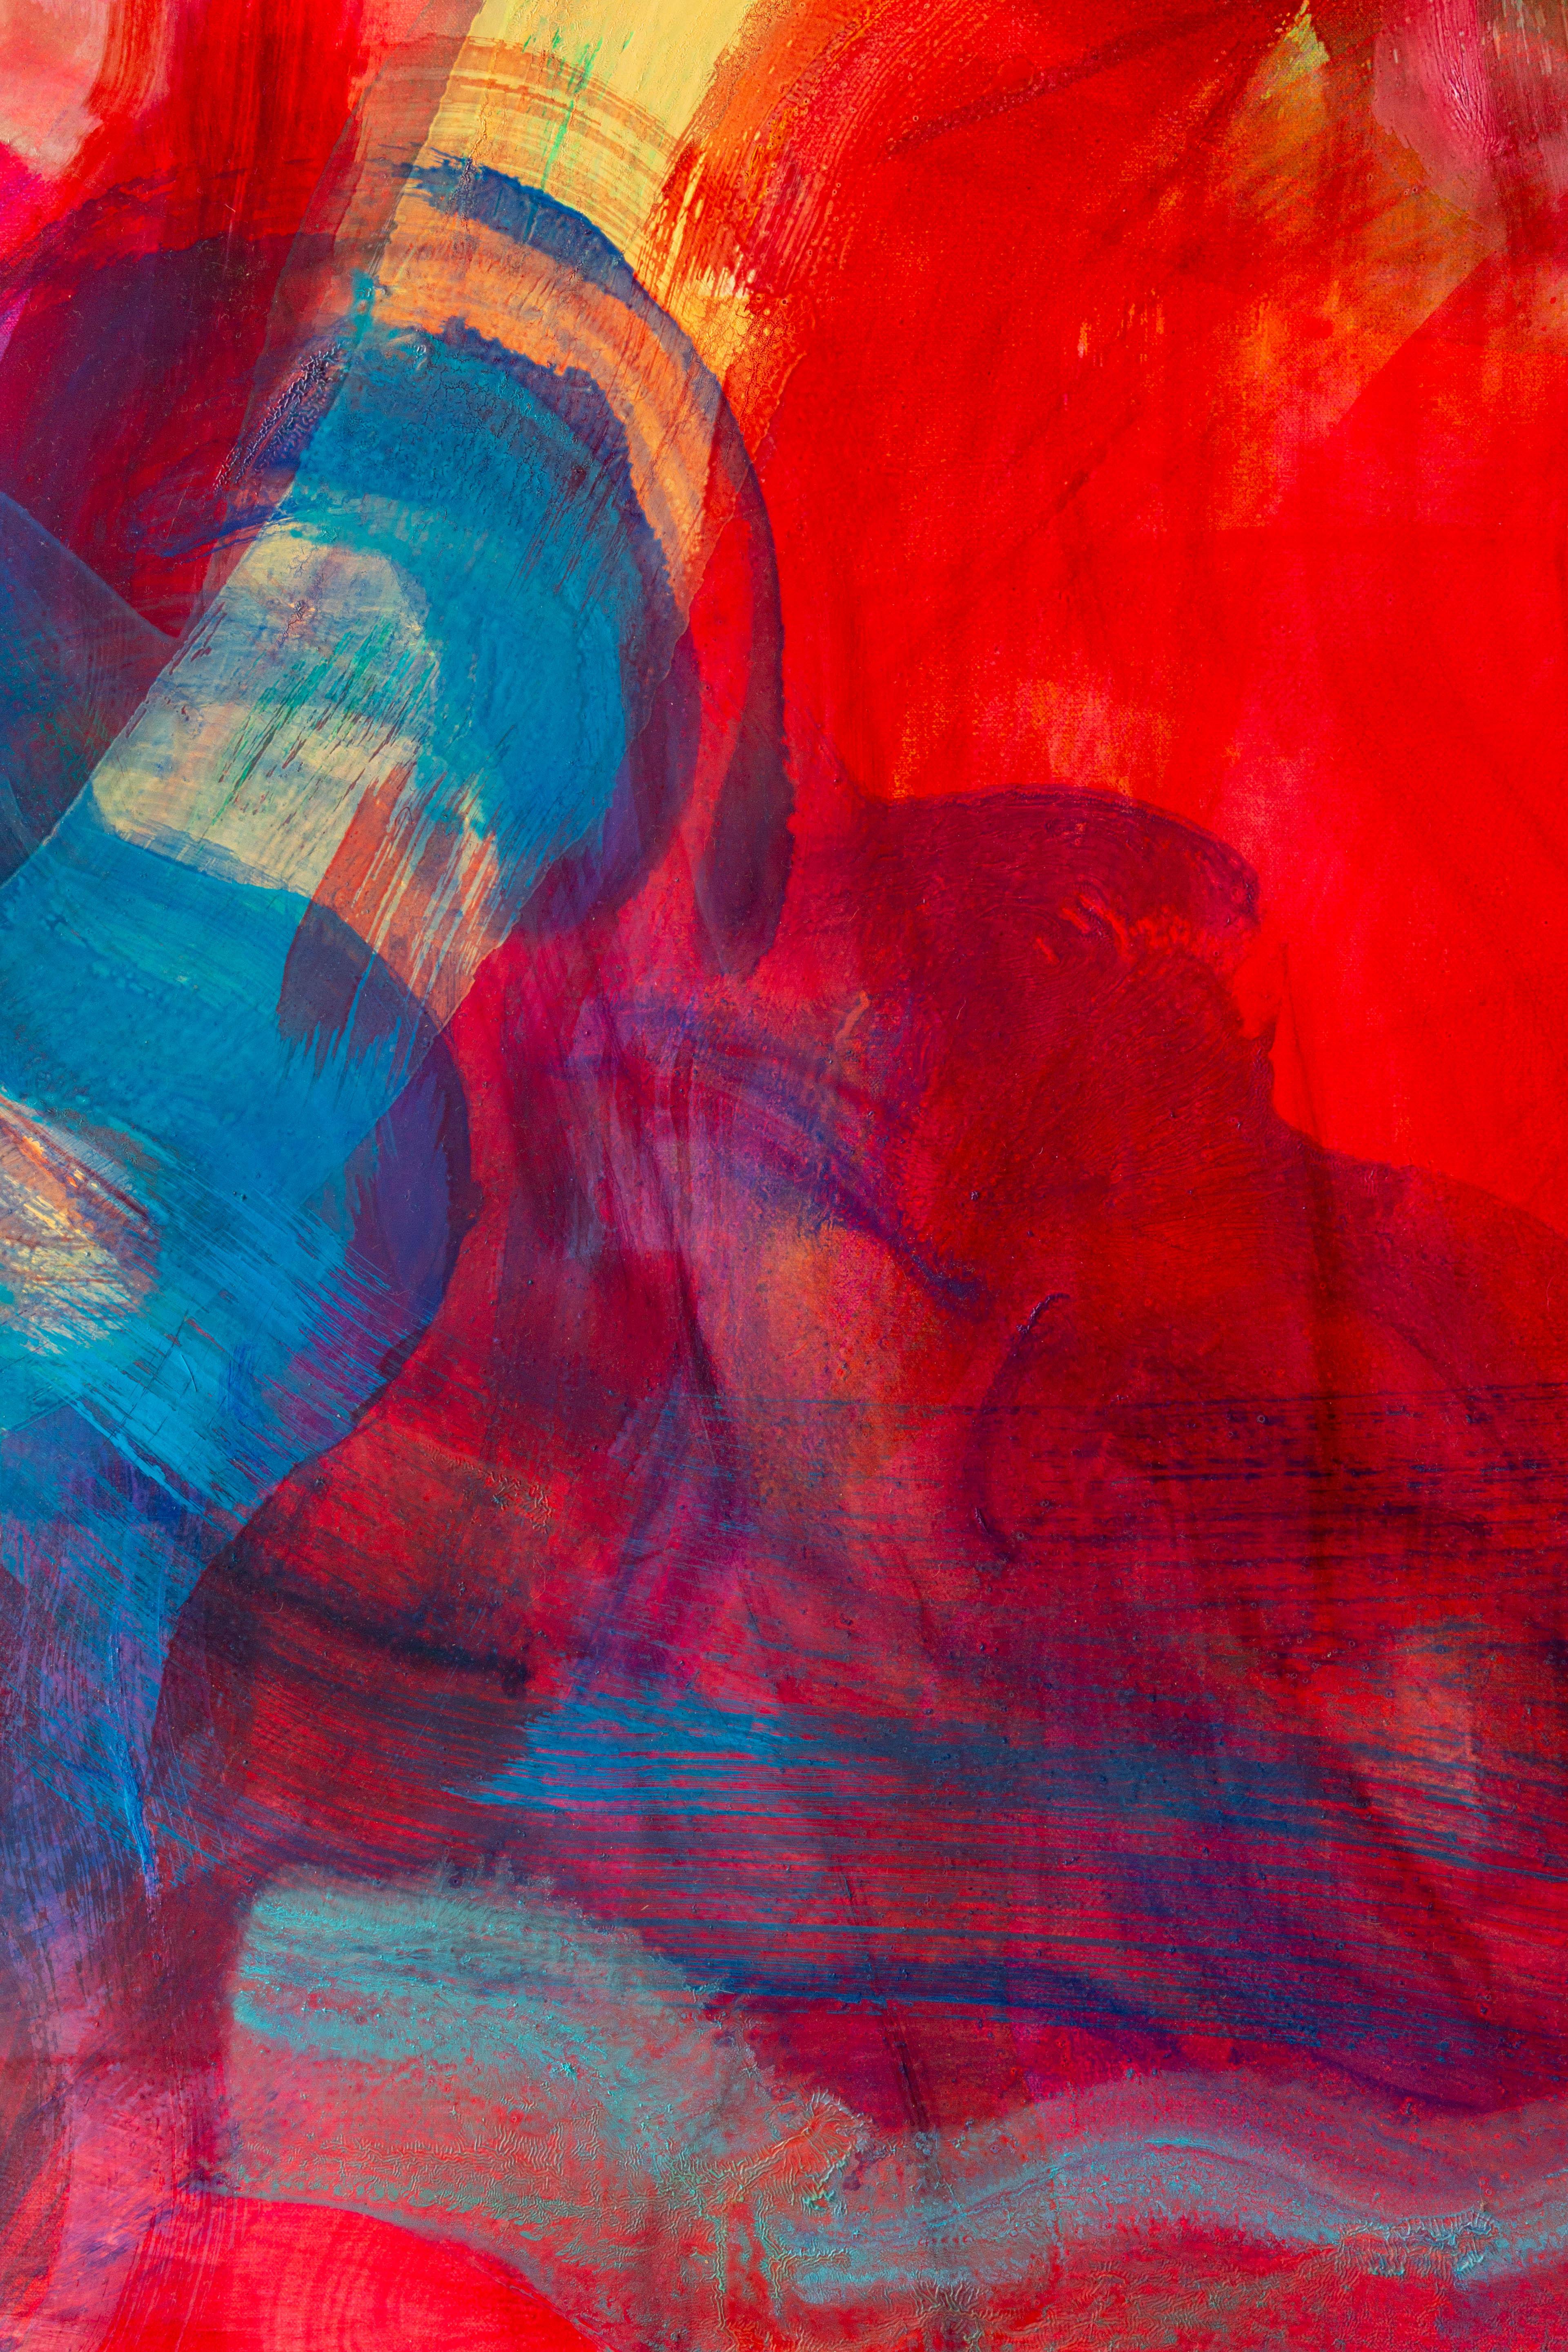 Violet, blue and red intertwine in this gestural abstract painting by Debra Drexler.  This painting is inspired by the intensity of light and colors in Hawaii, where the artist splits her time between there and New York City. Bold lines and